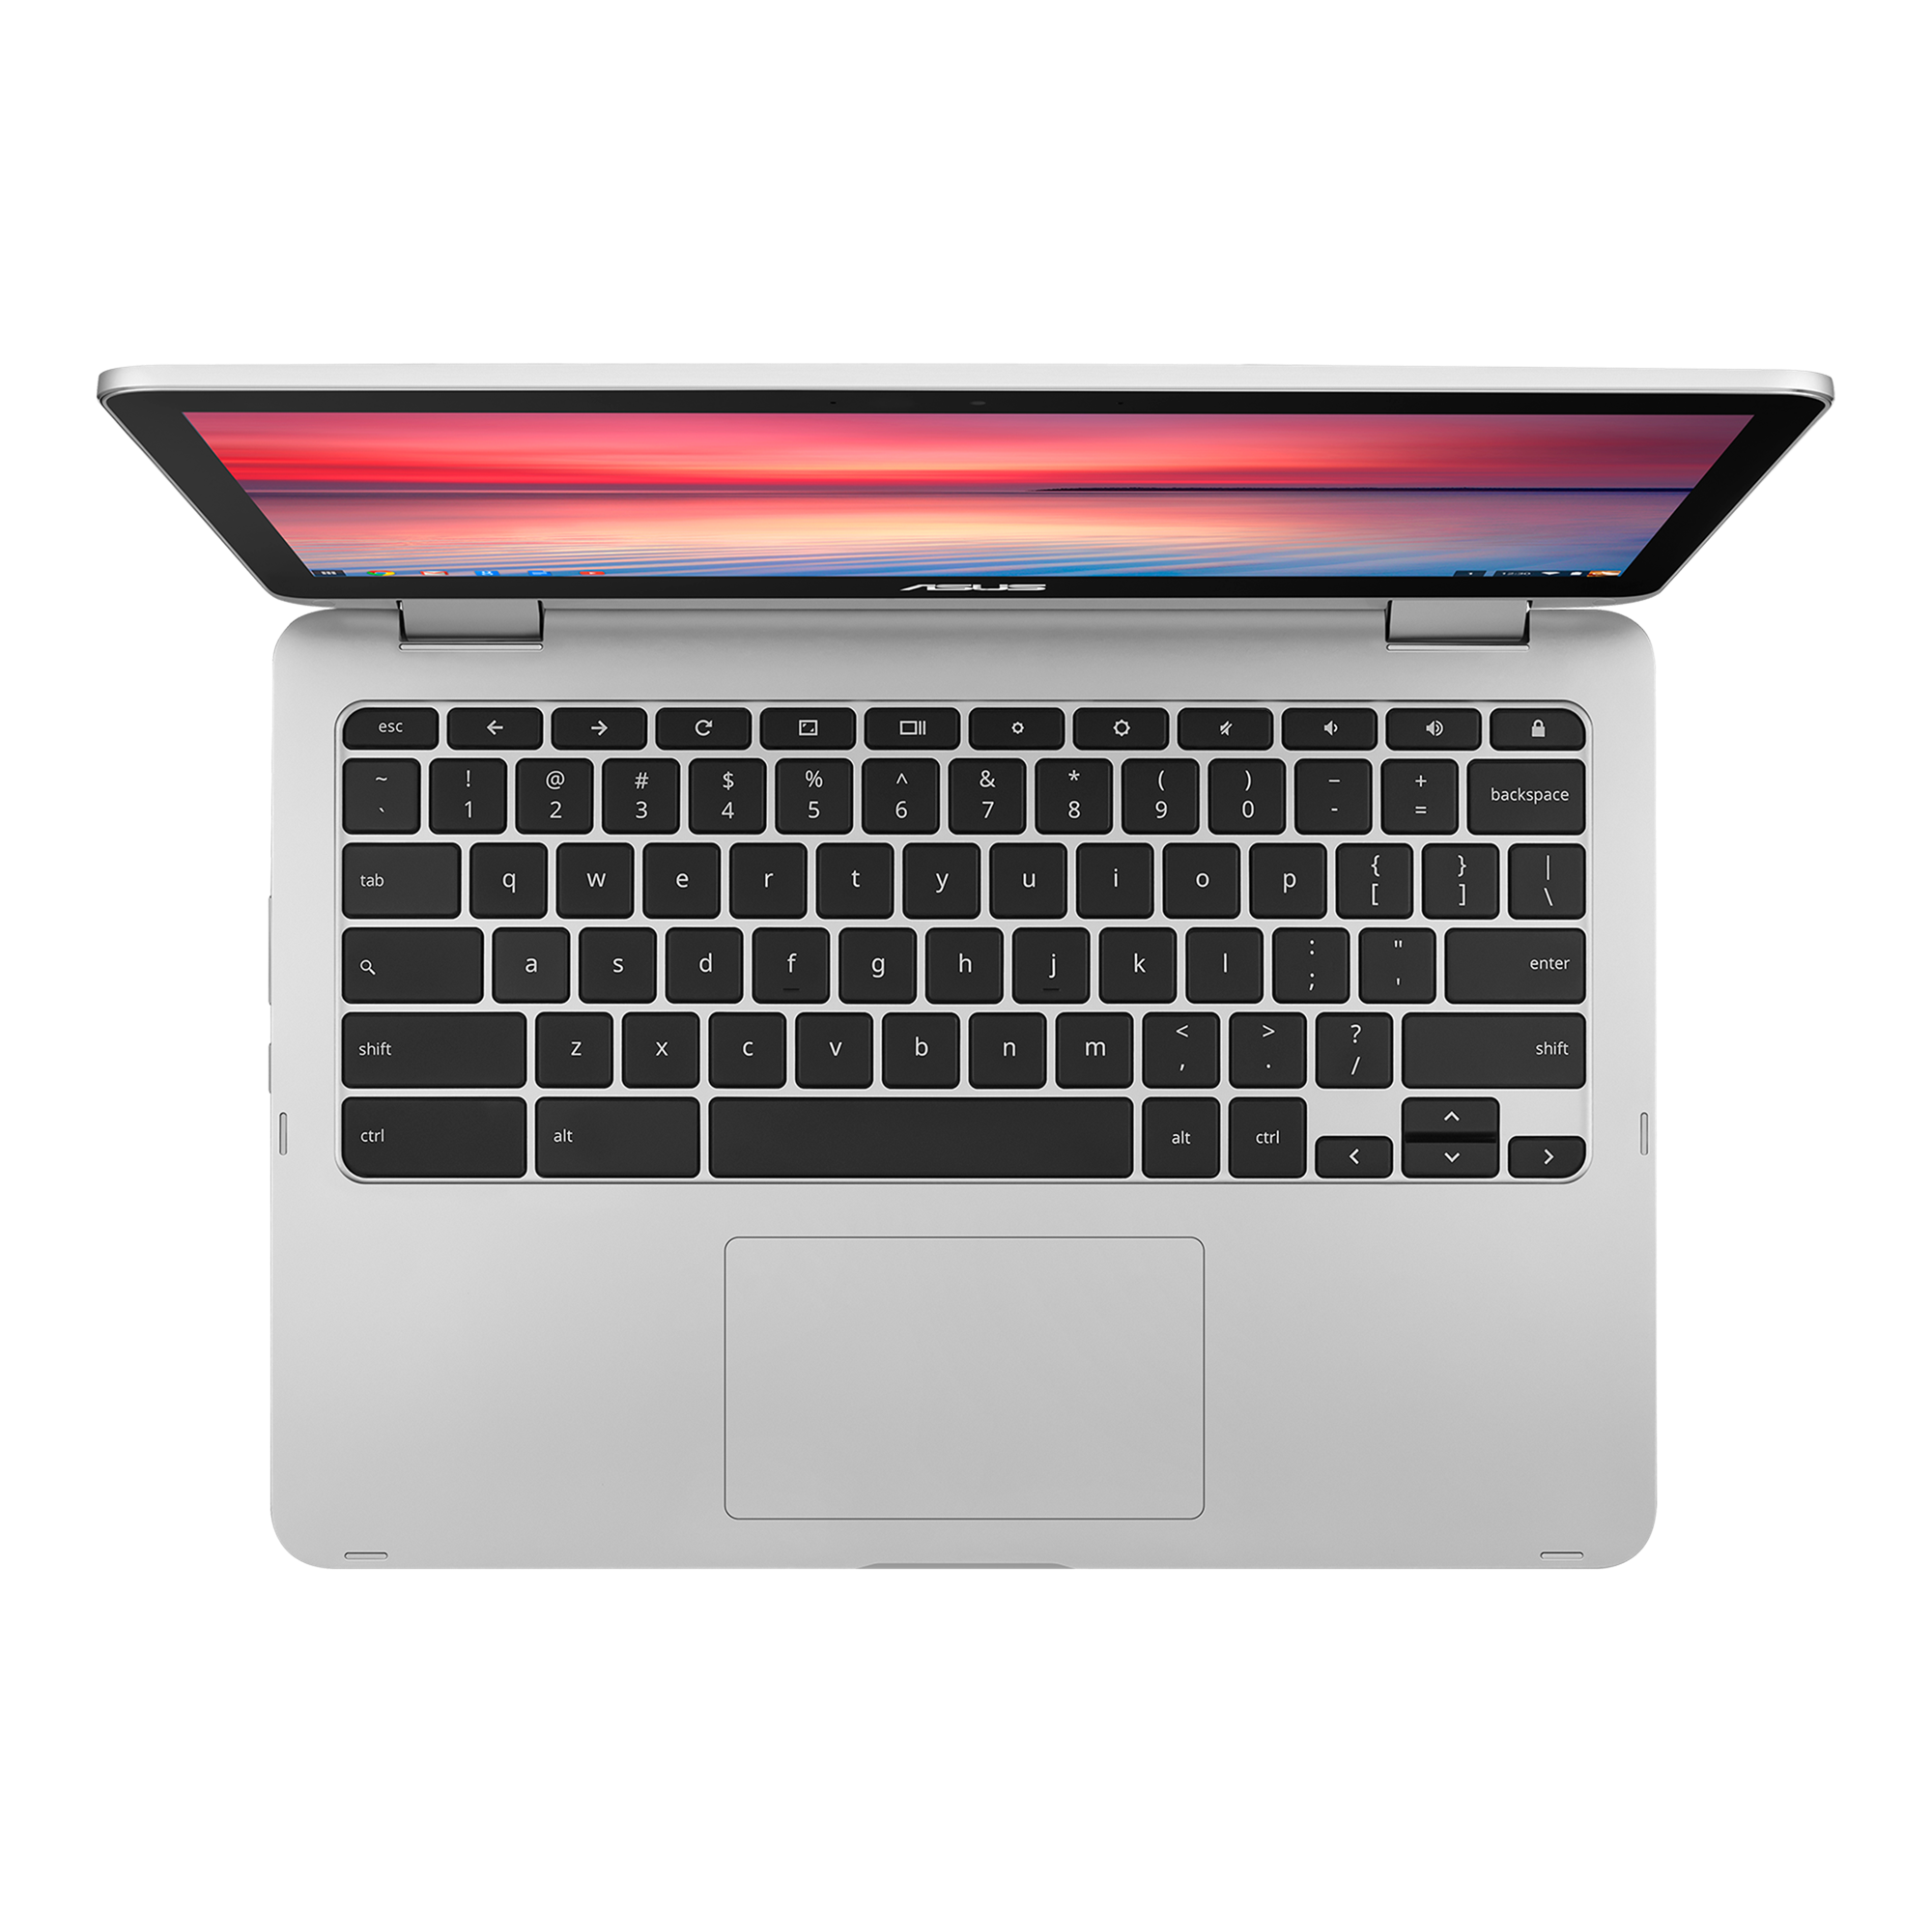 ASUS Chromebook Flip C302｜Laptops For Home｜ASUS USA